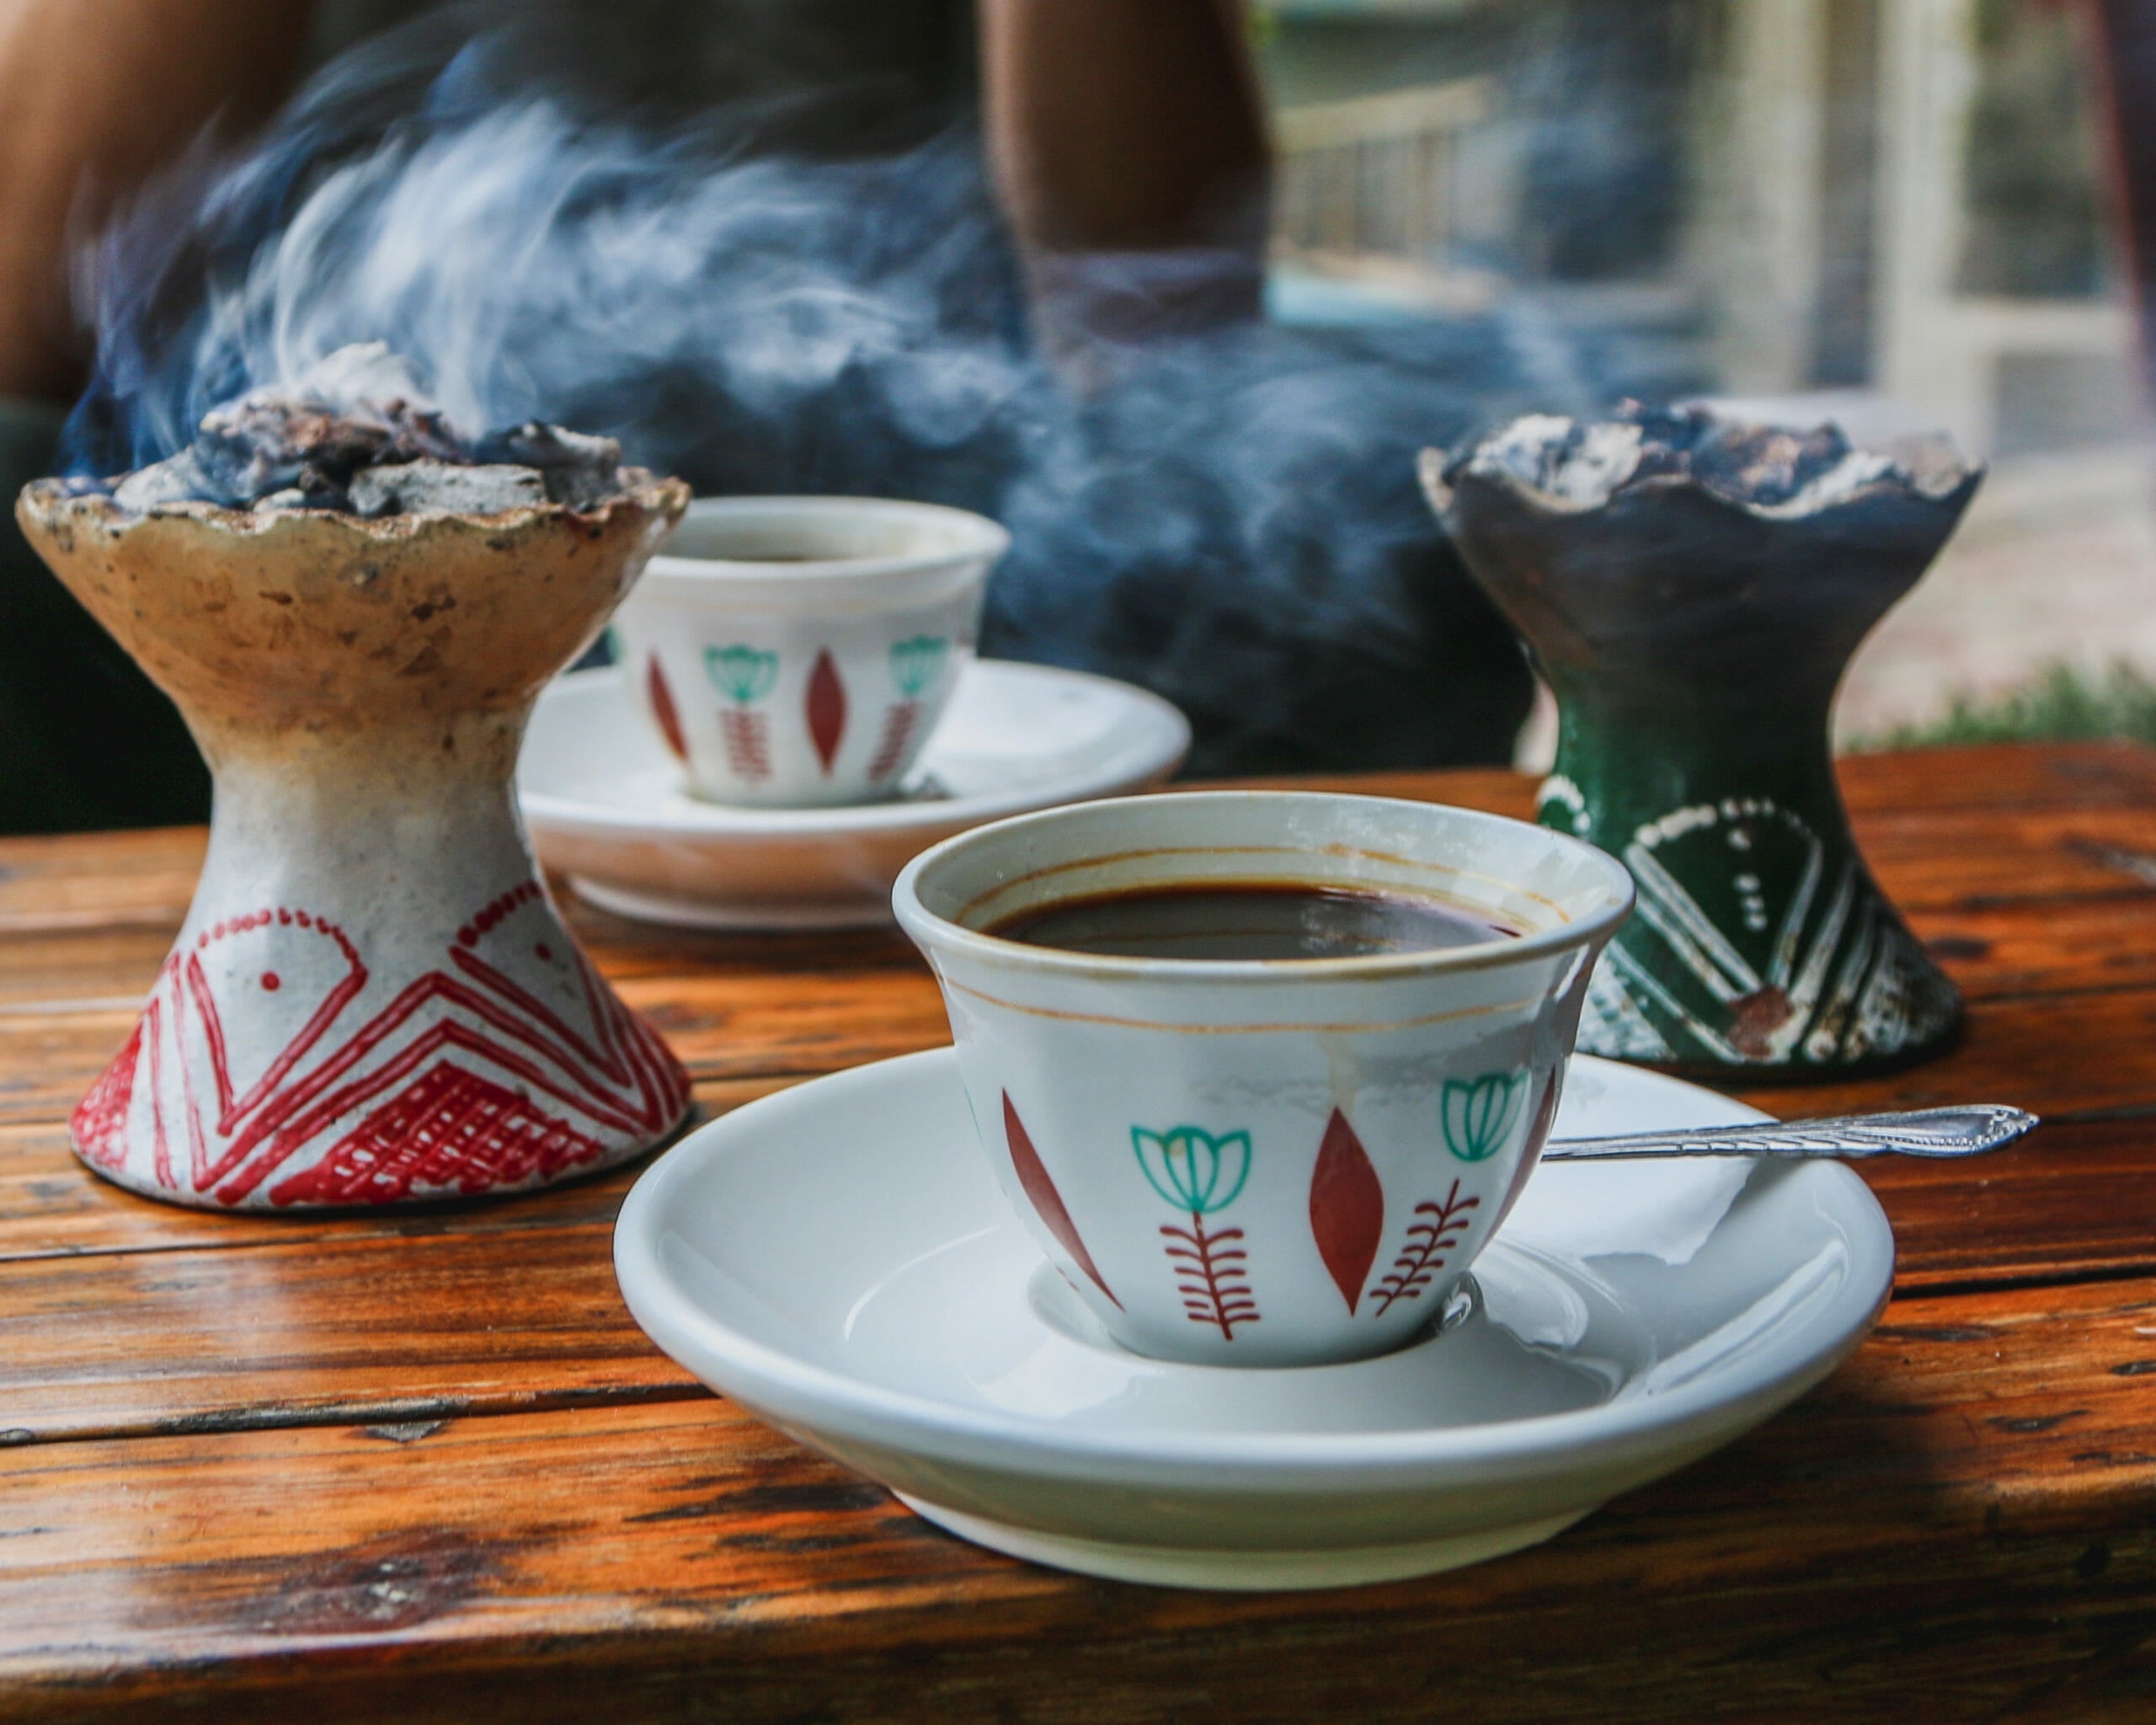 Two white porcelain mugs each sitting on a white saucer. There are green and red patterns on the outside of each mug. To the left, is a ceramic incense burner with red patterns on the side. To the right, there is another ceramic incense holder that is green with white patterns on the outside. Both incense holders have smoke coming from them.